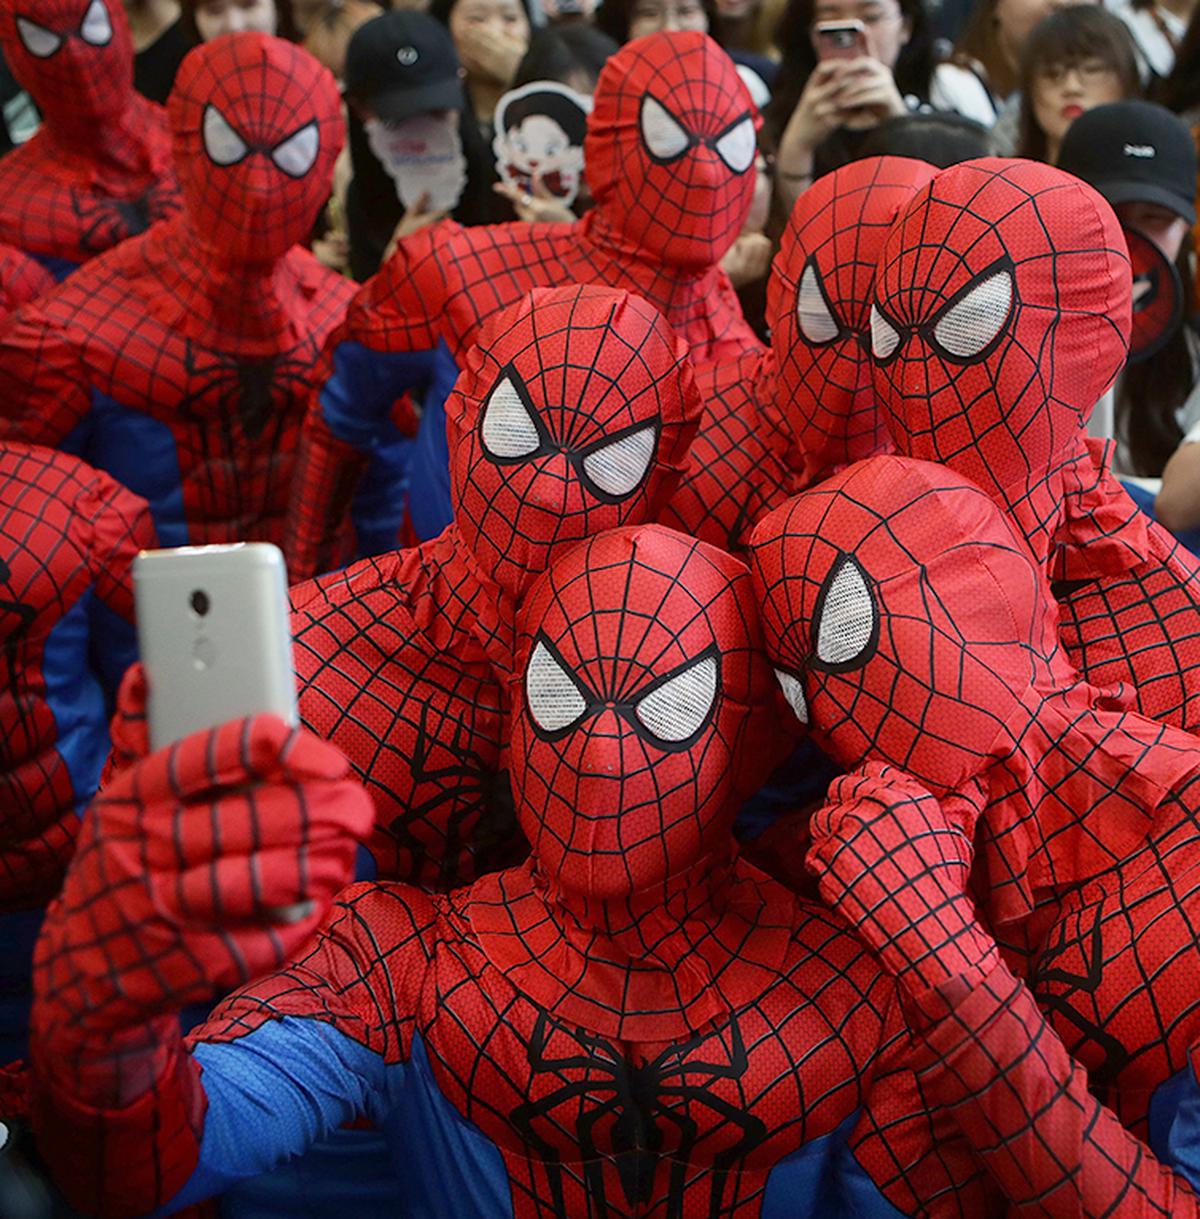 As Spider-Man turns 60, fans reflect on diverse appeal